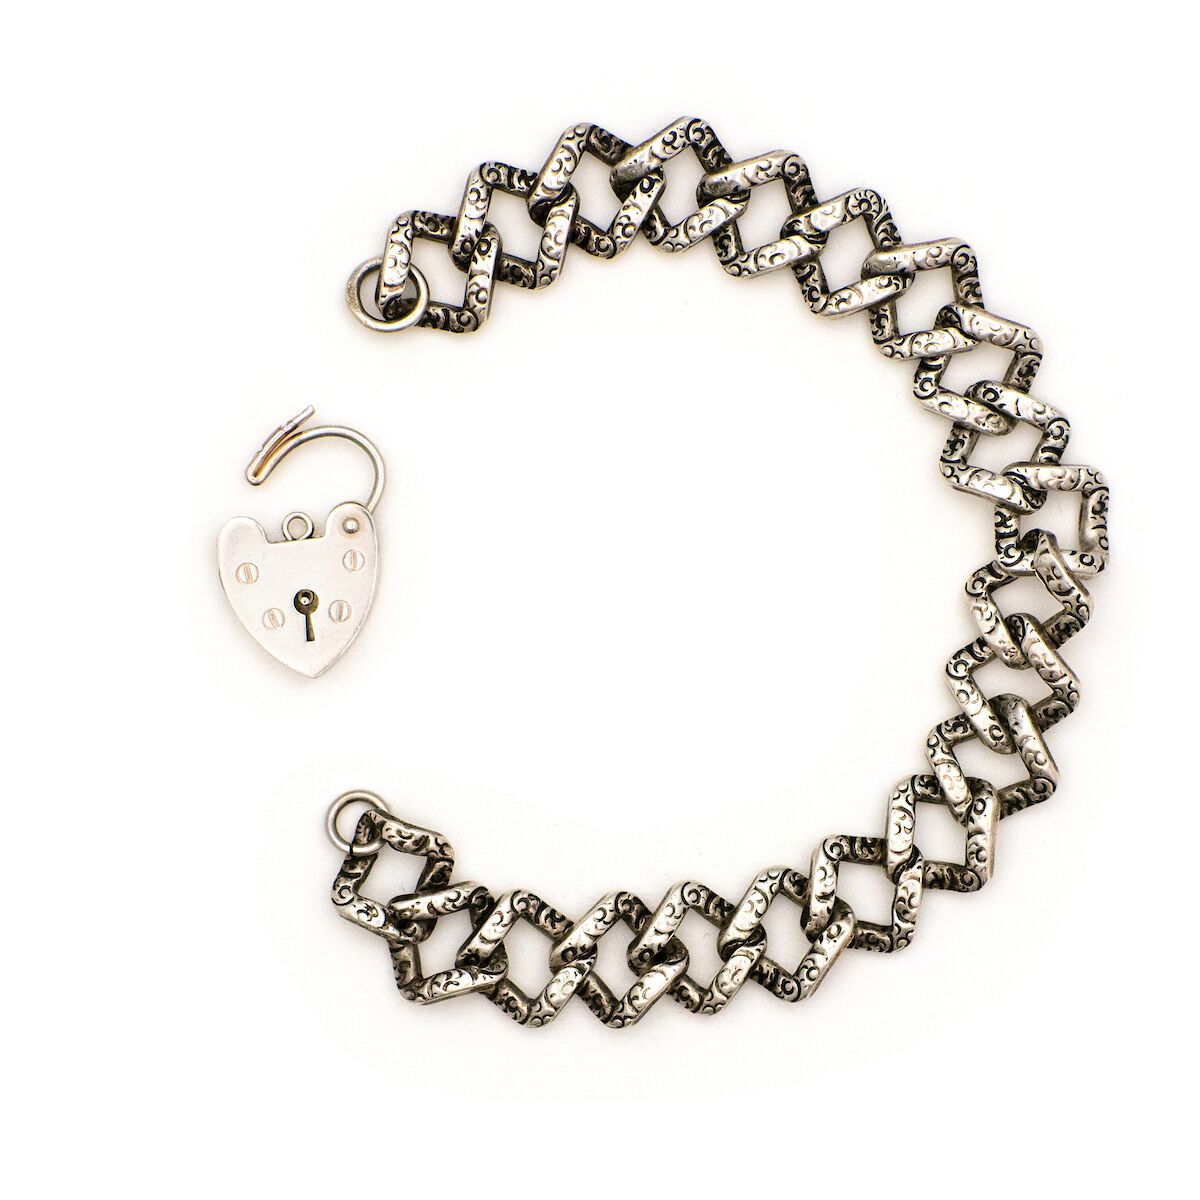 This Vintage Silver Lock Bracelet features a heart shaped lock that is able to open, on a 7" curb chain. On one side of the chain are hand engraved markings, giving the bracelet an edgy feel. Worn simply on its own or made into a statement piece by adding charms, this bracelet has many possibilities. Front bracelet view